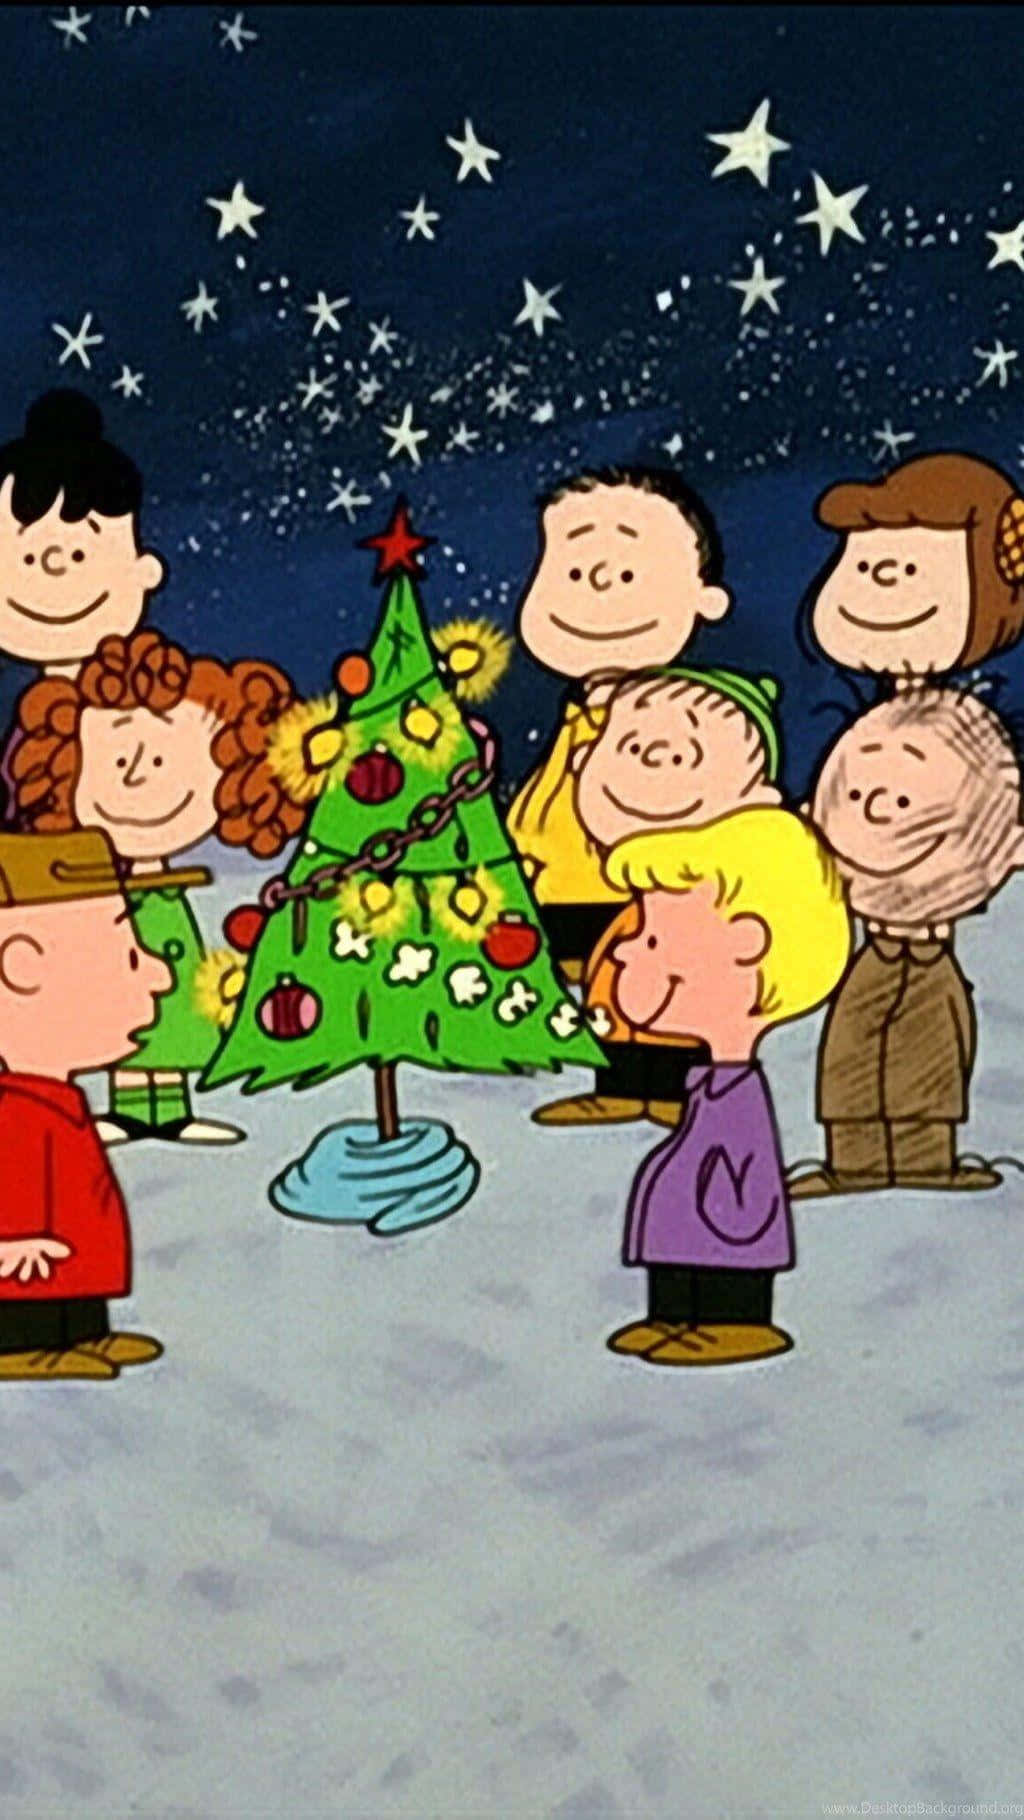 Celebrate The Joy Of The Season With Charlie Brown! Background